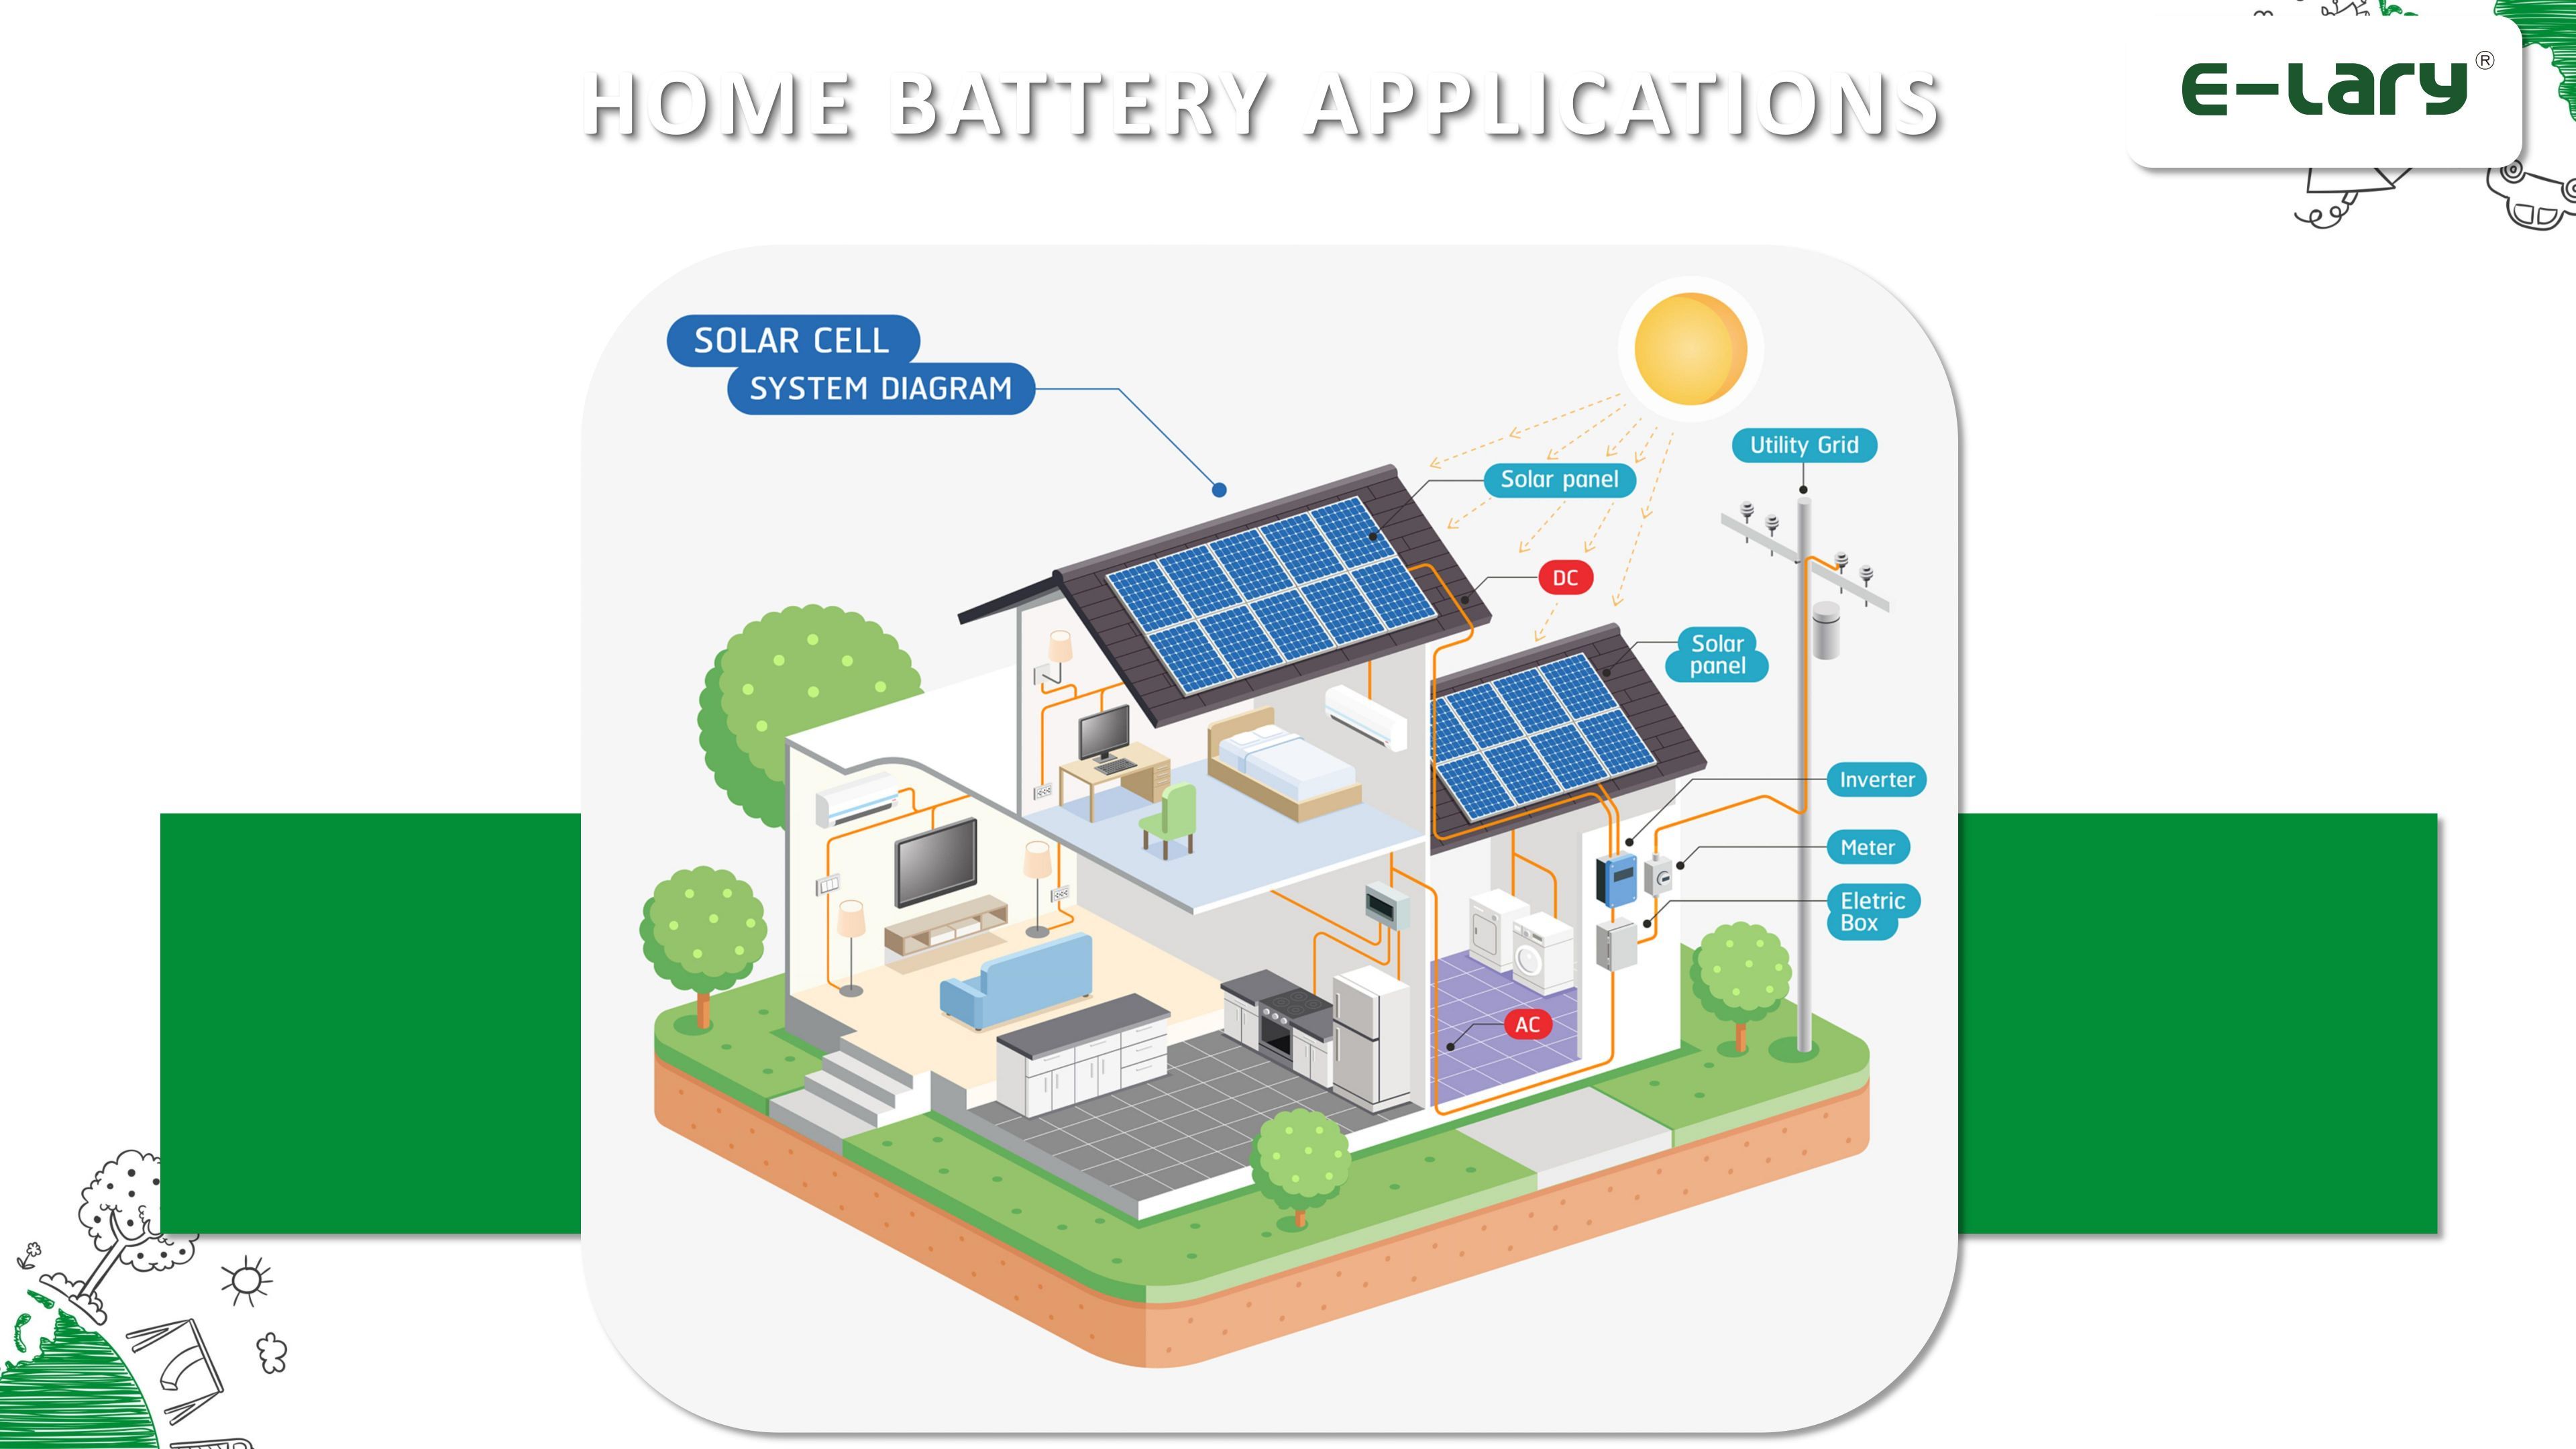 Home battery applications